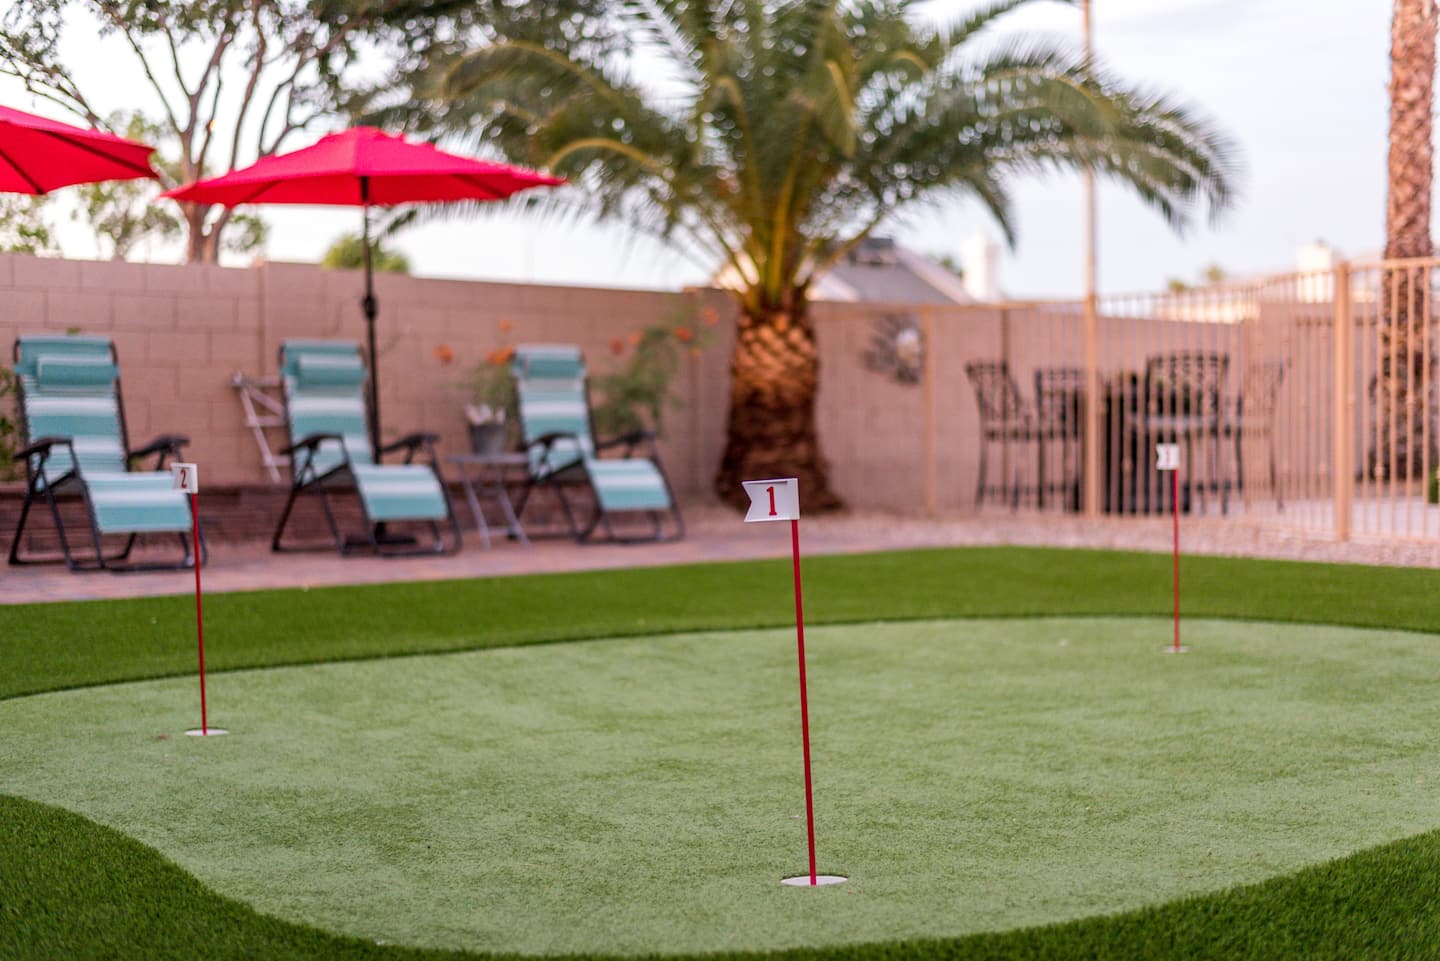 This backyard putting green setting is paradise to every golfer.